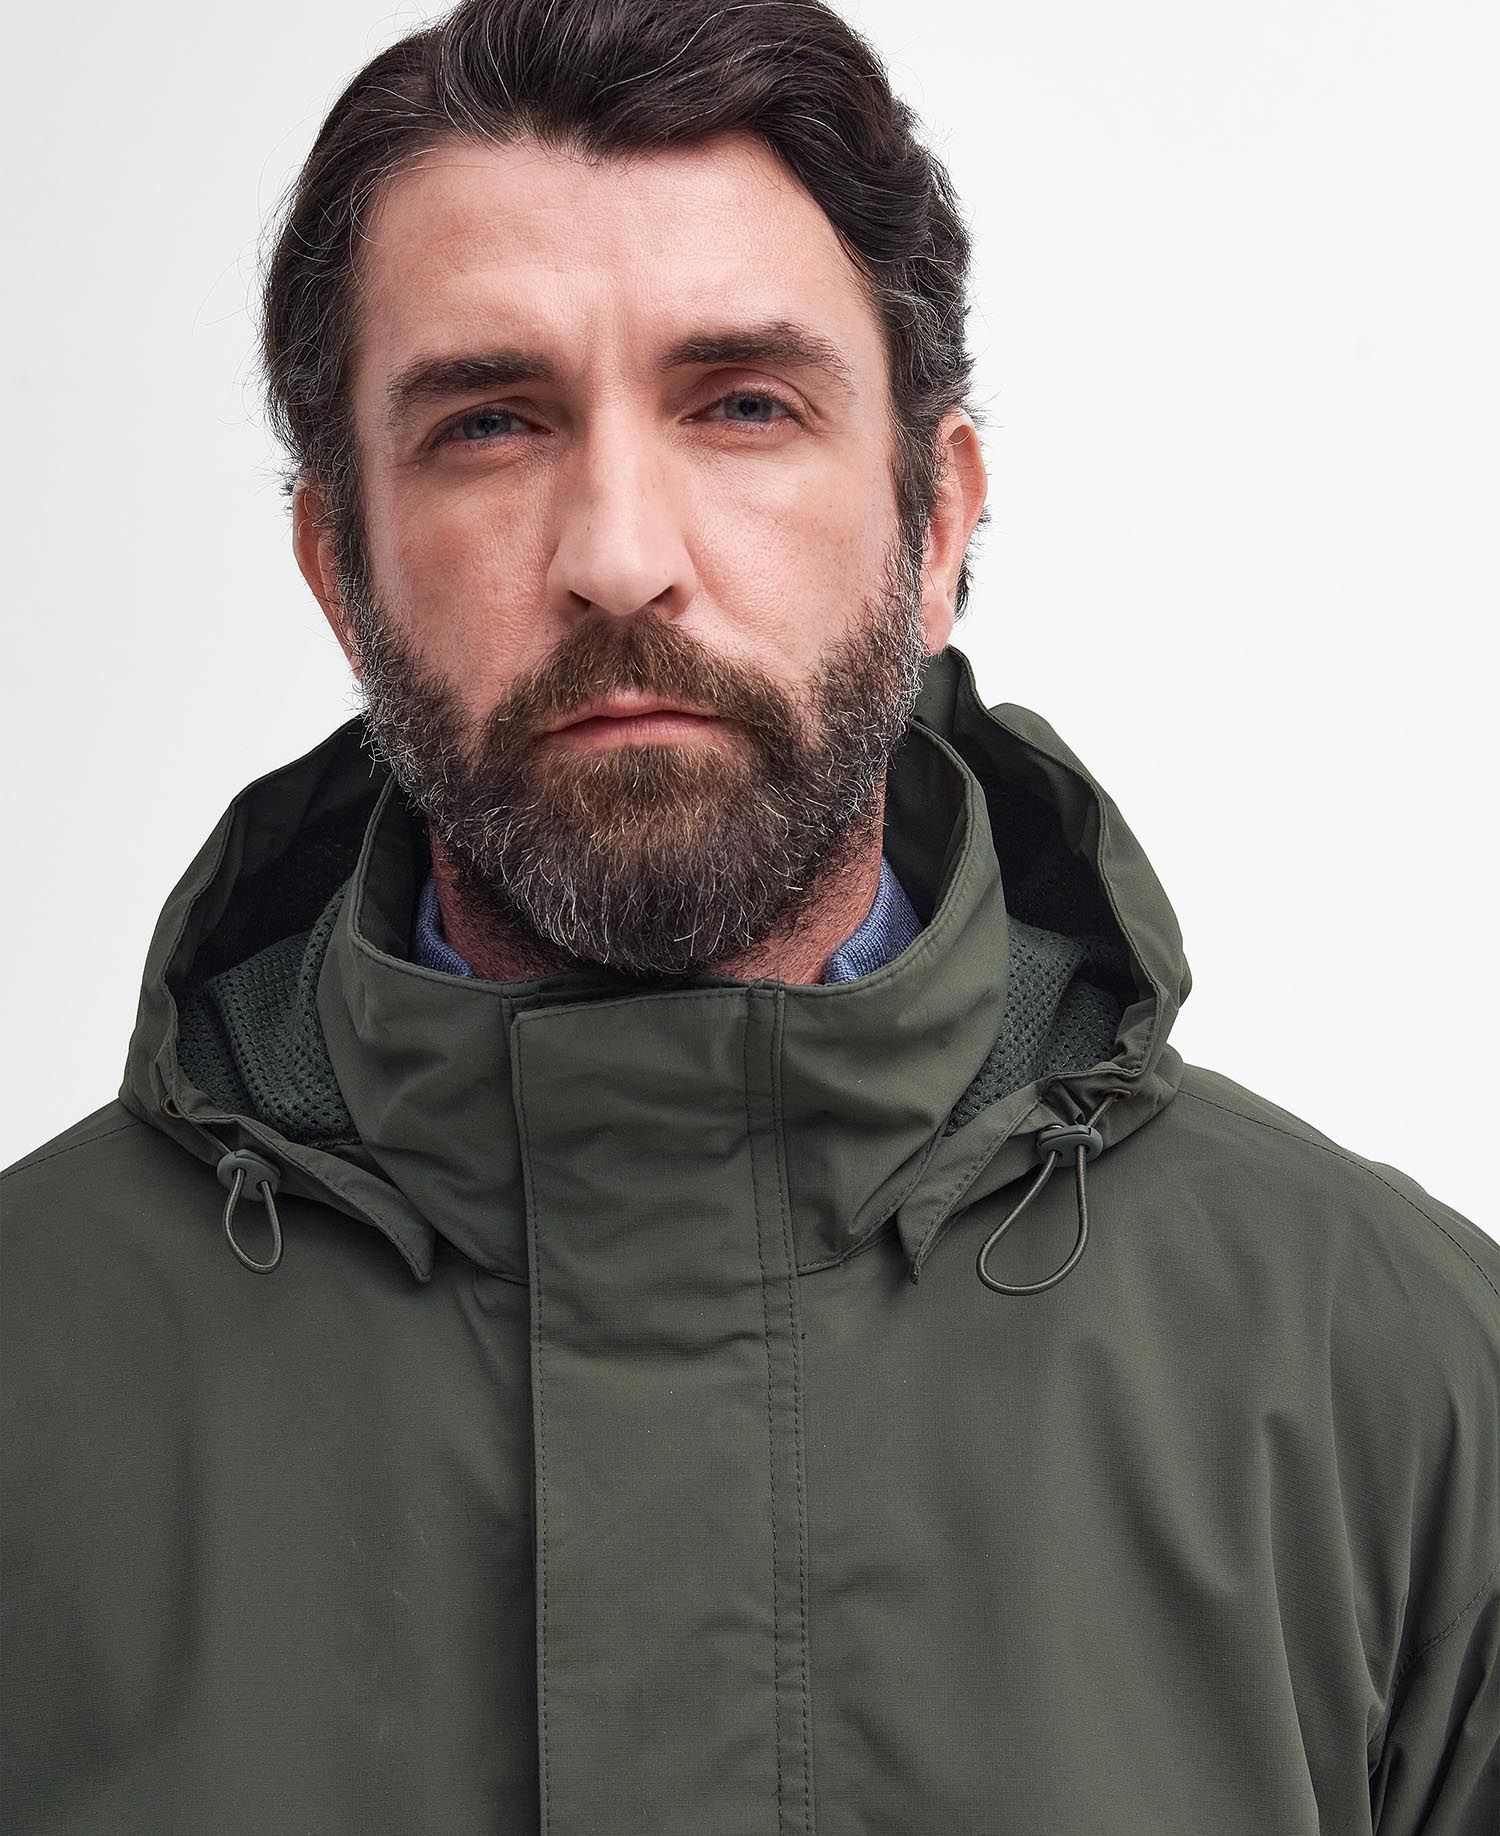 Shop the Barbour Swinton Jacket here at Barbour. | Barbour